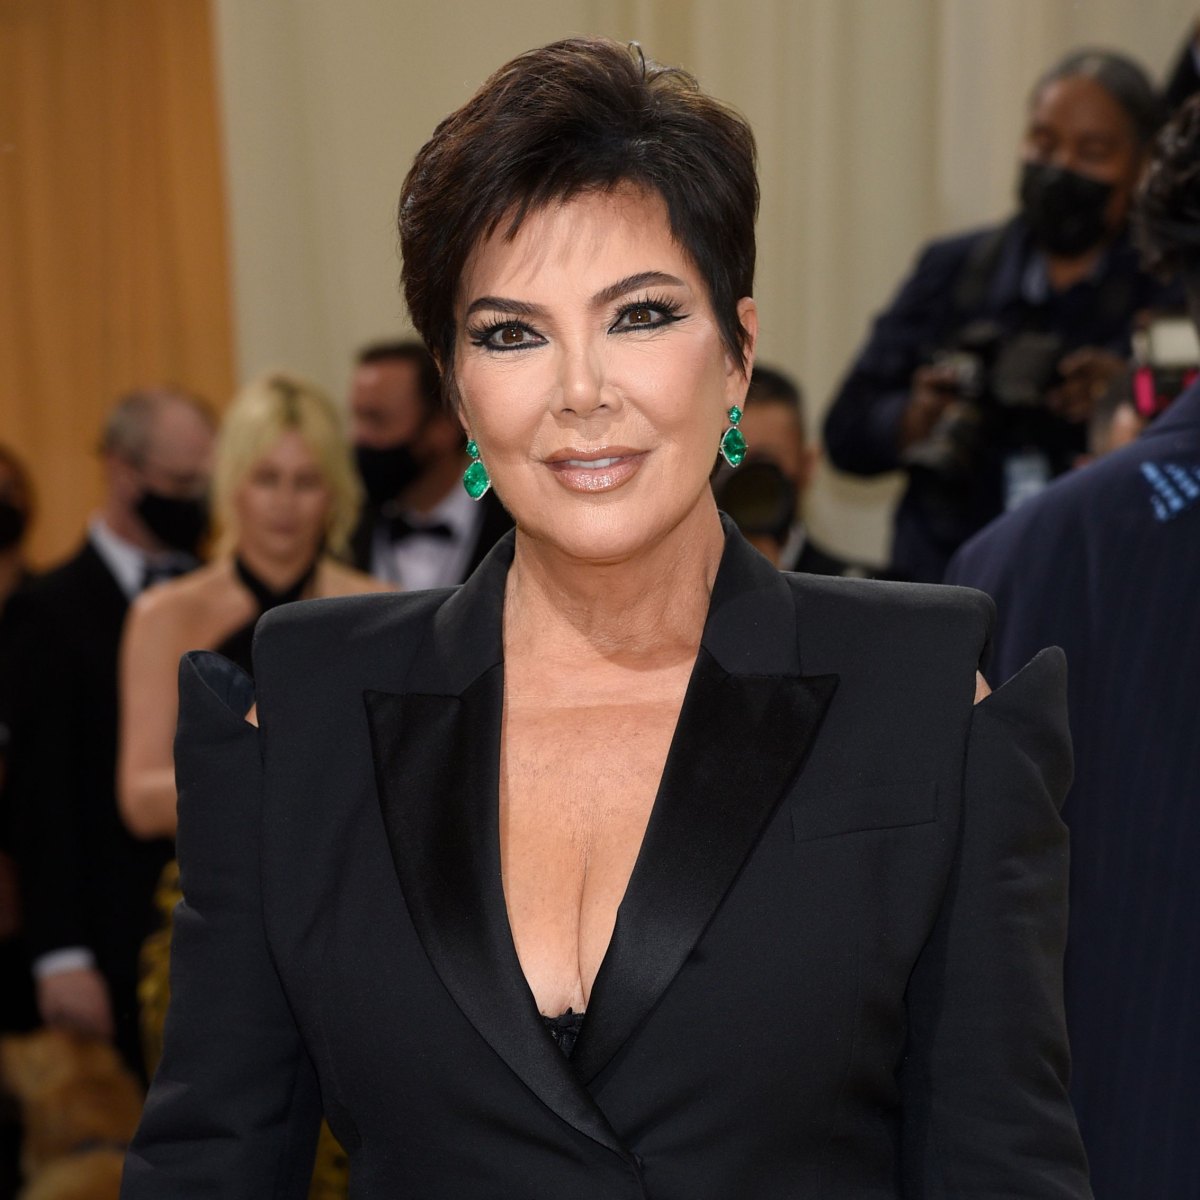 Kris Jenner : Latest News - In Touch Weekly